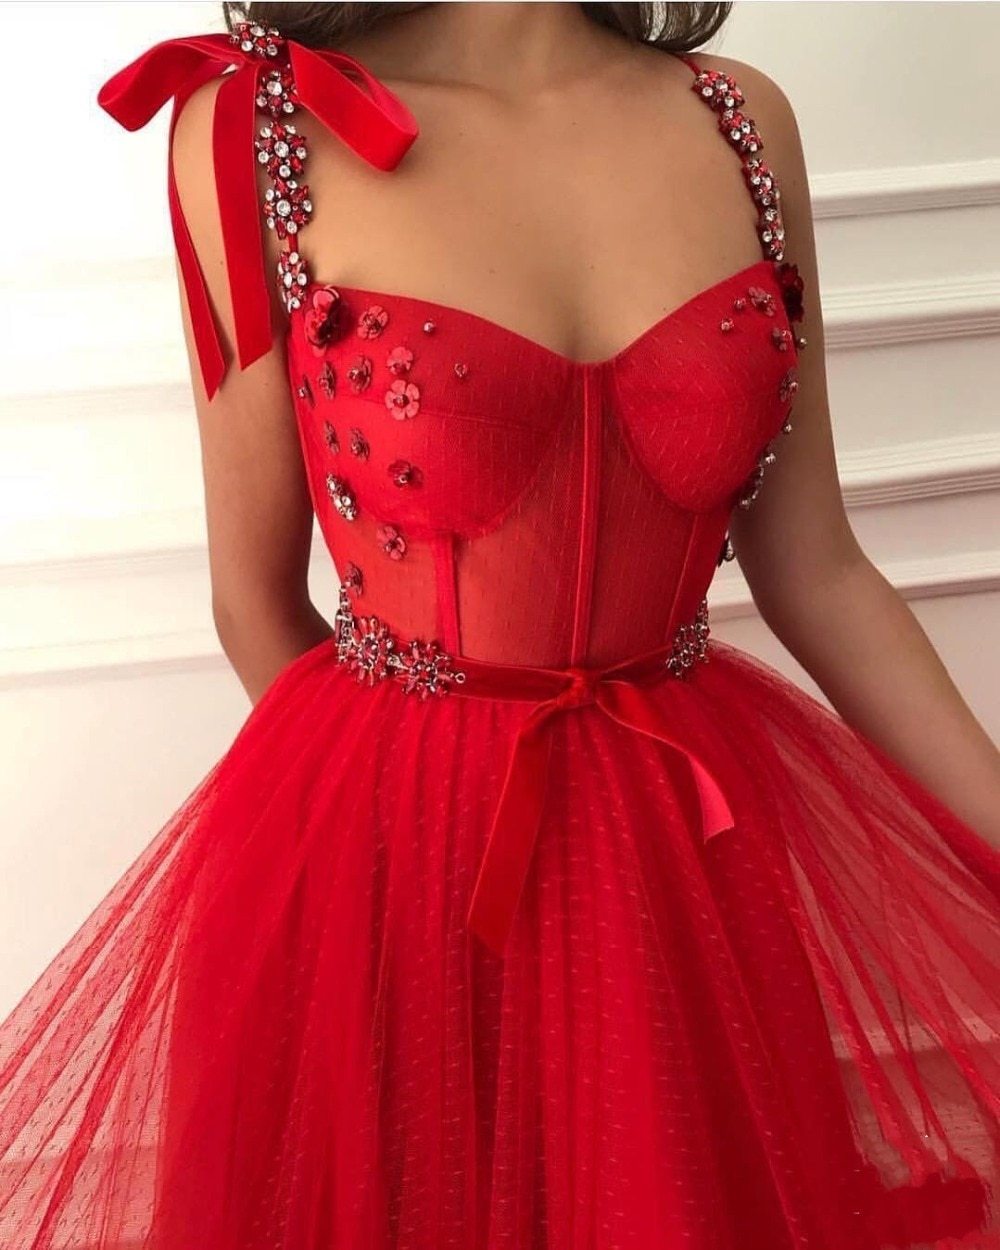 Too Sophisticated Red Evening Dress. - luxebabyco